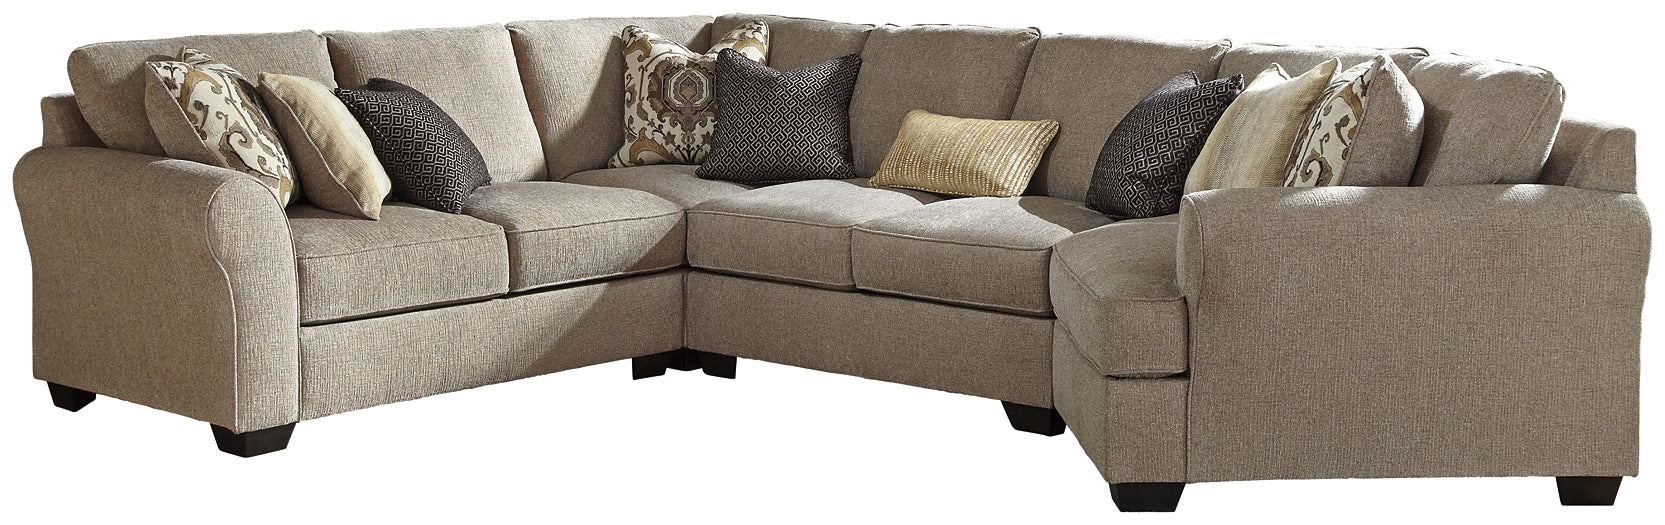 Pantomine 4-Piece Sectional with Cuddler Rent Wise Rent To Own Jacksonville, Florida